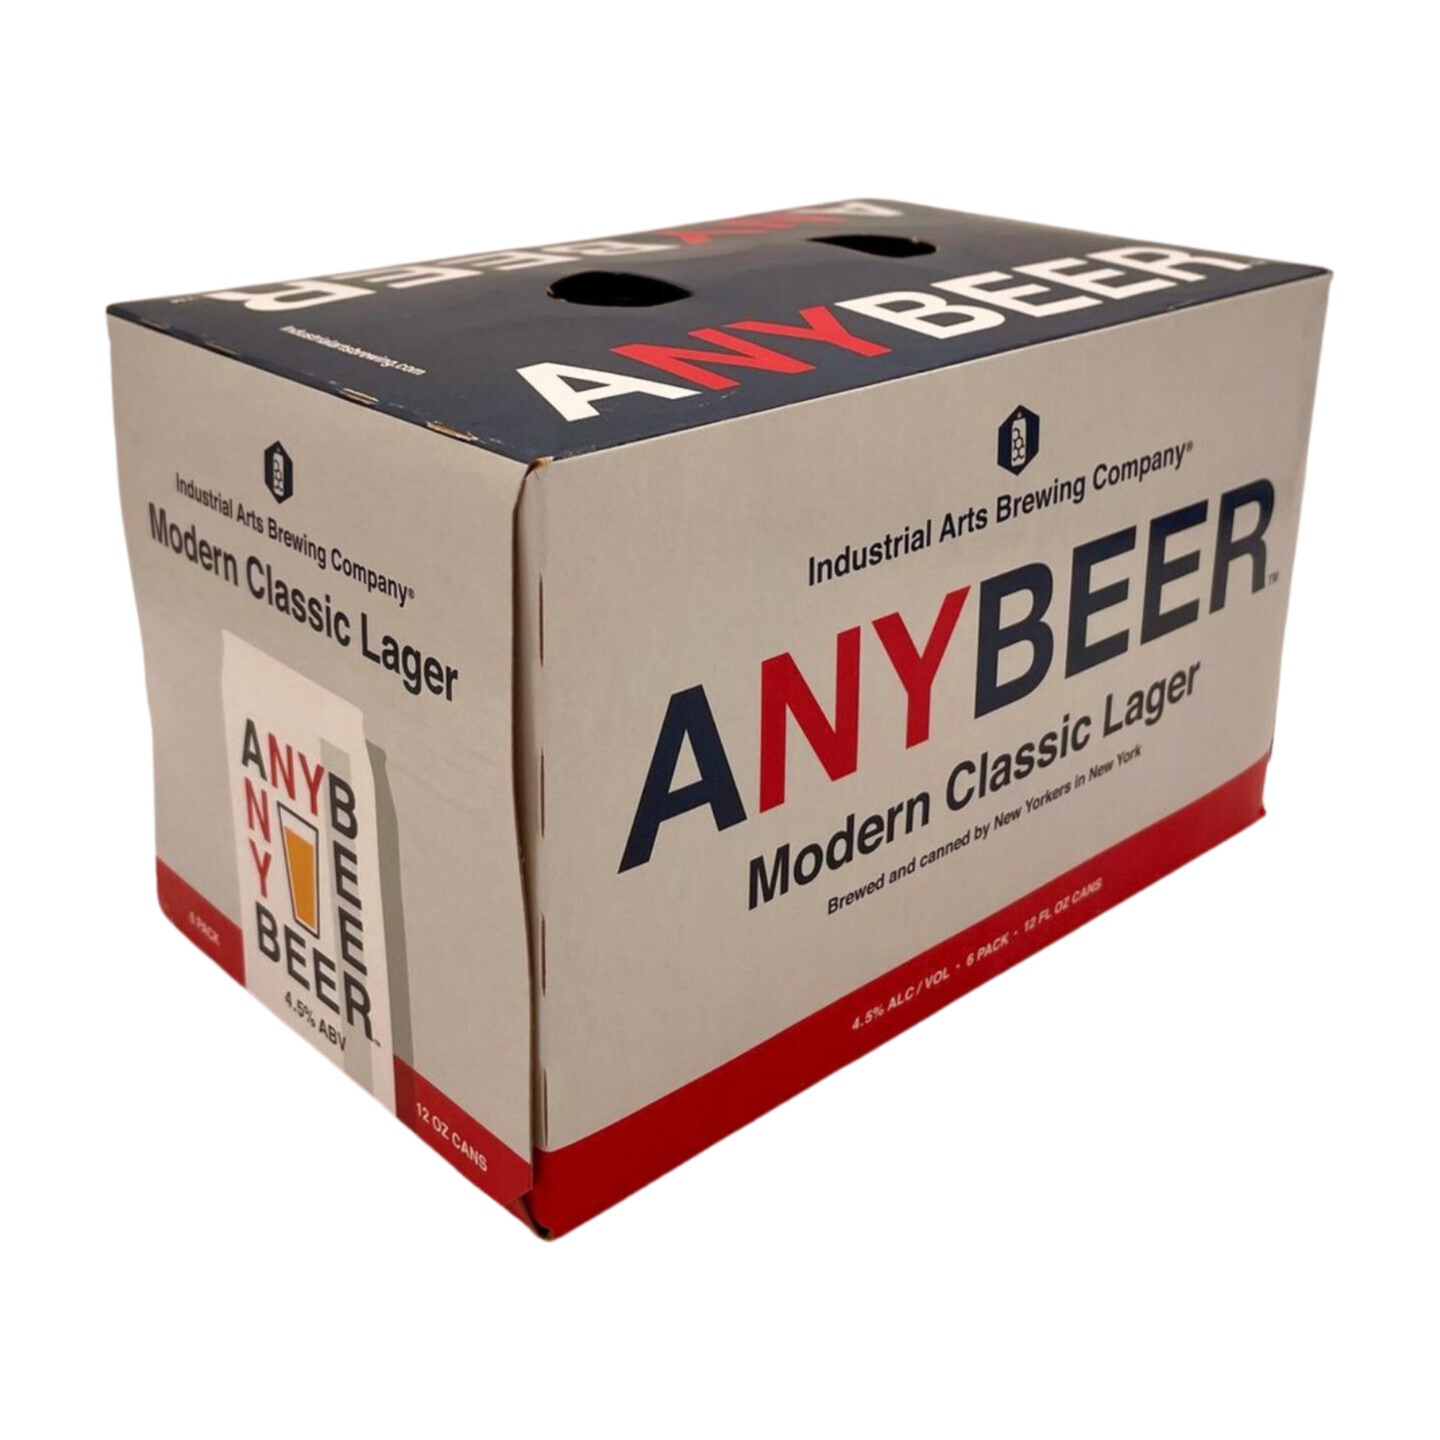 Industrial Arts 'ANY Beer' Lager (6pk - 12oz cans)